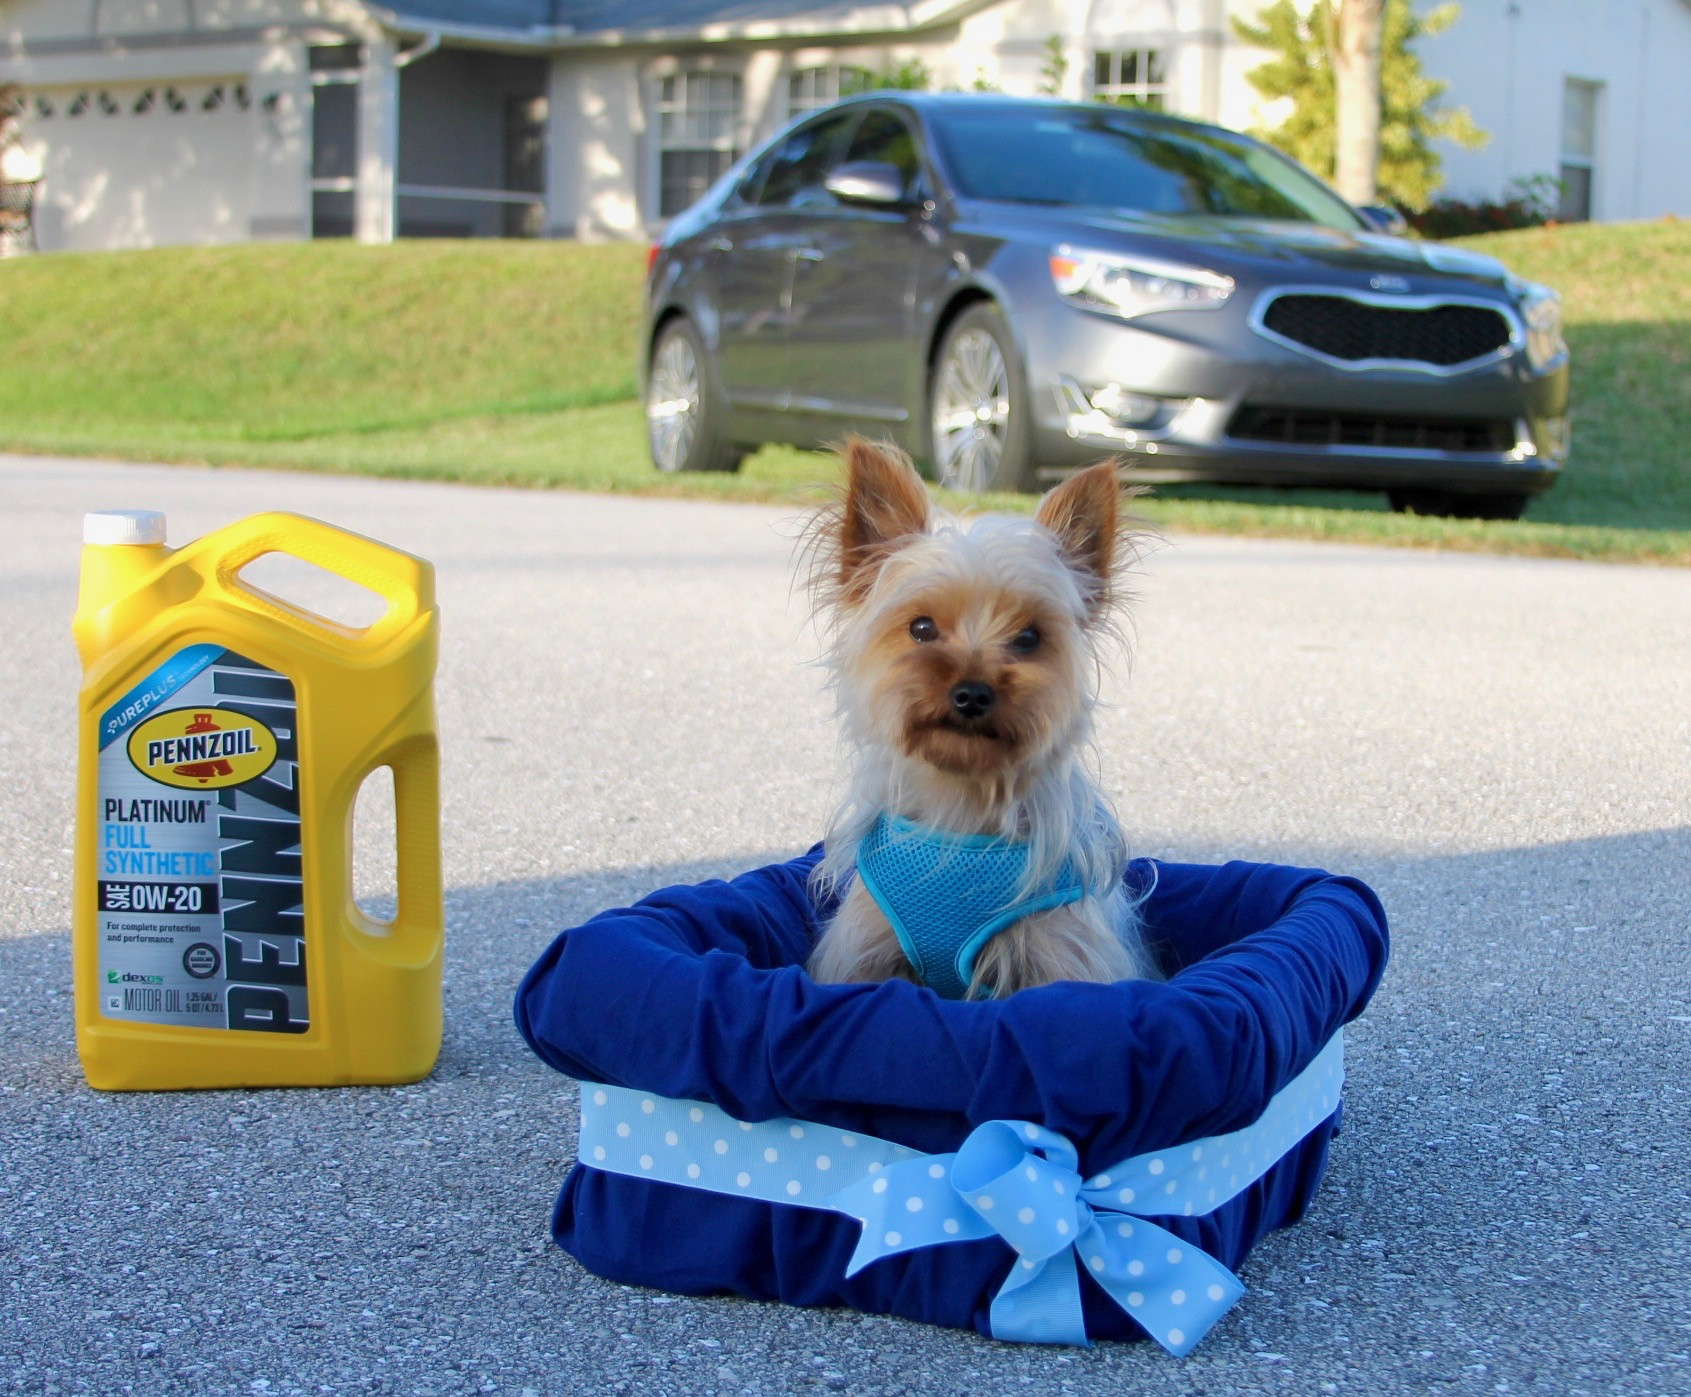 DIY Dog Booster Seat
 No Sew DIY Car Booster Seat For Your Dog Growing Up